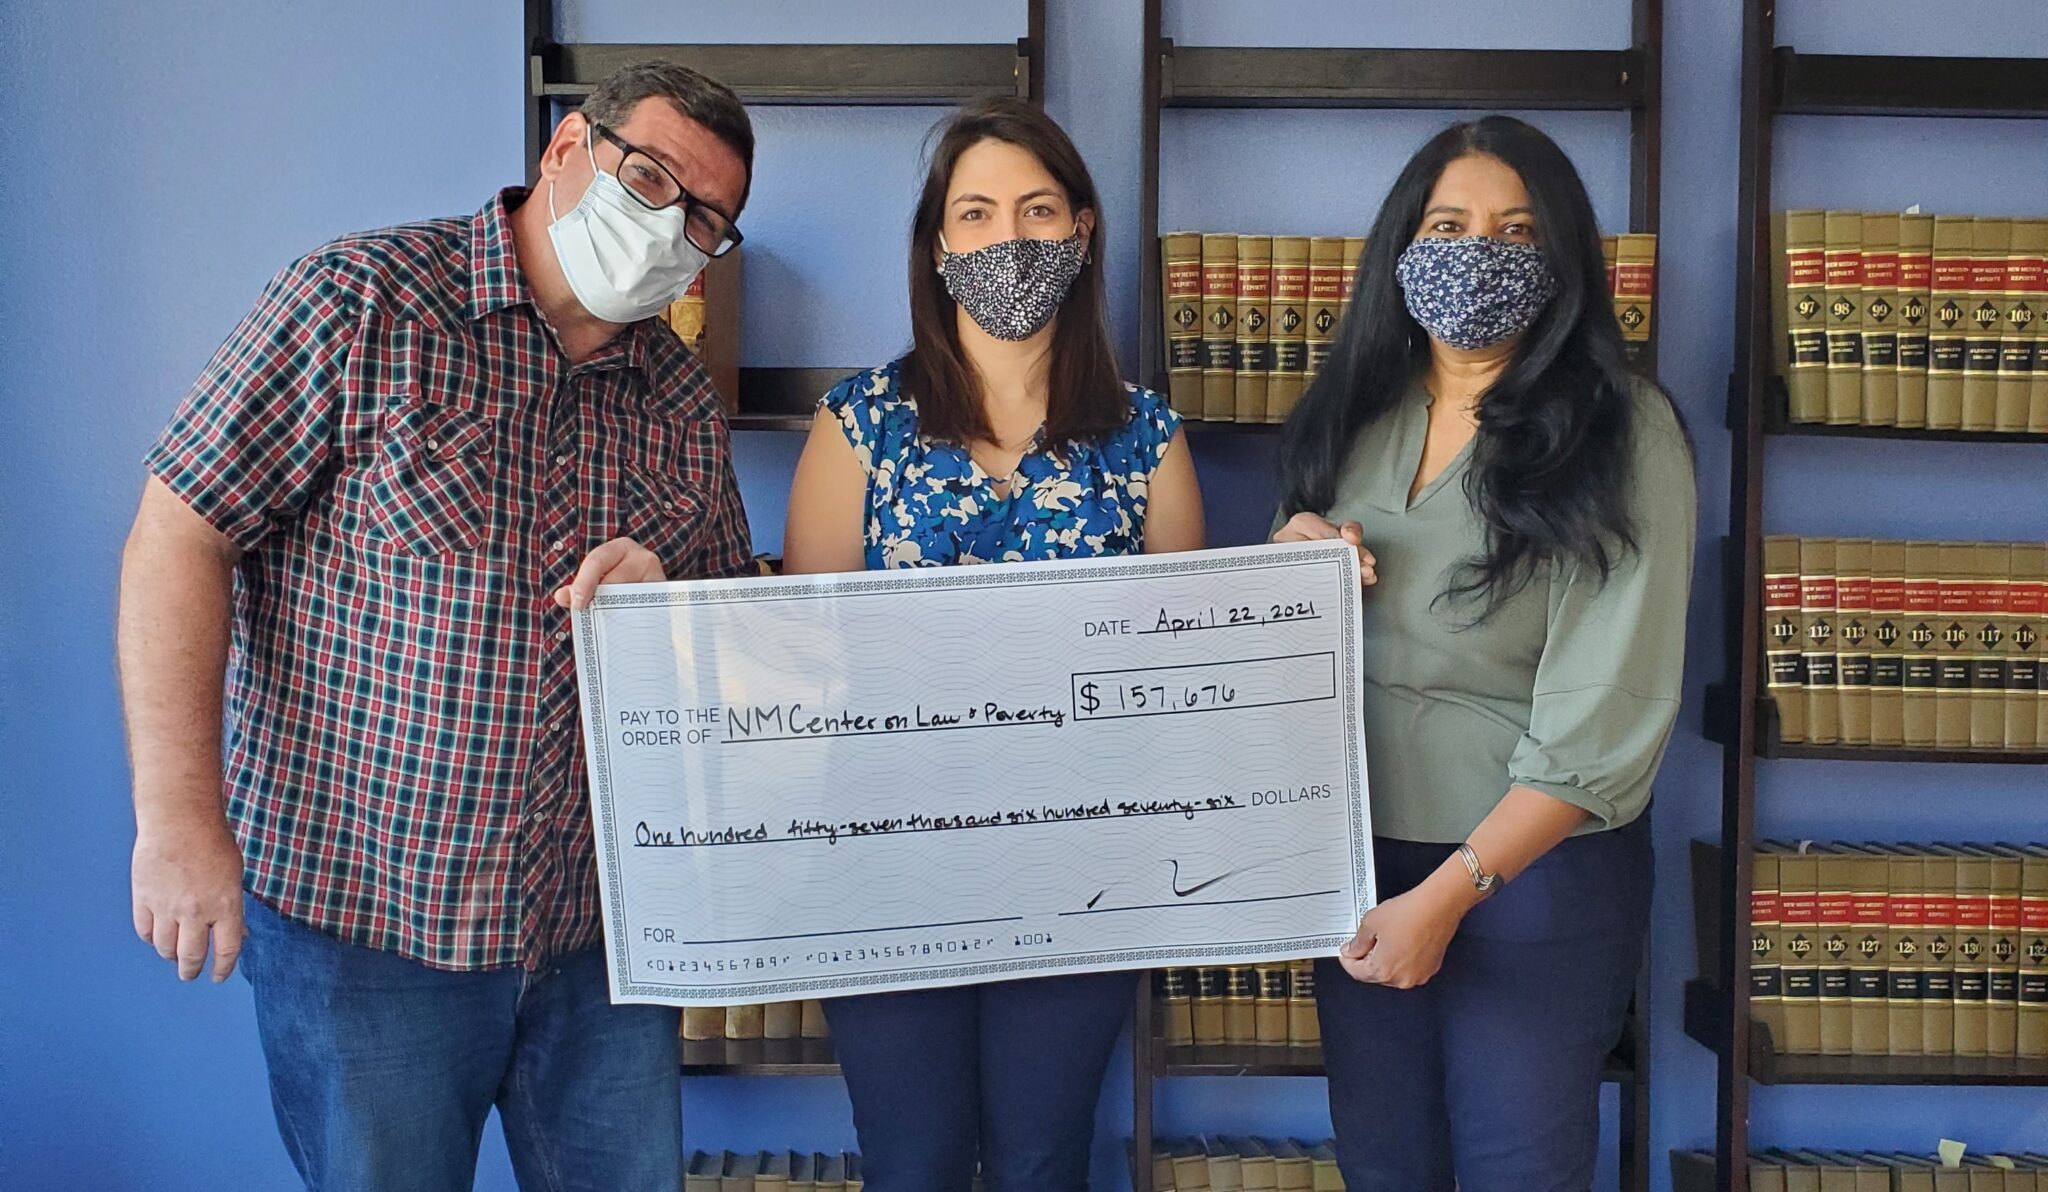 3 Adults Holding Large Check